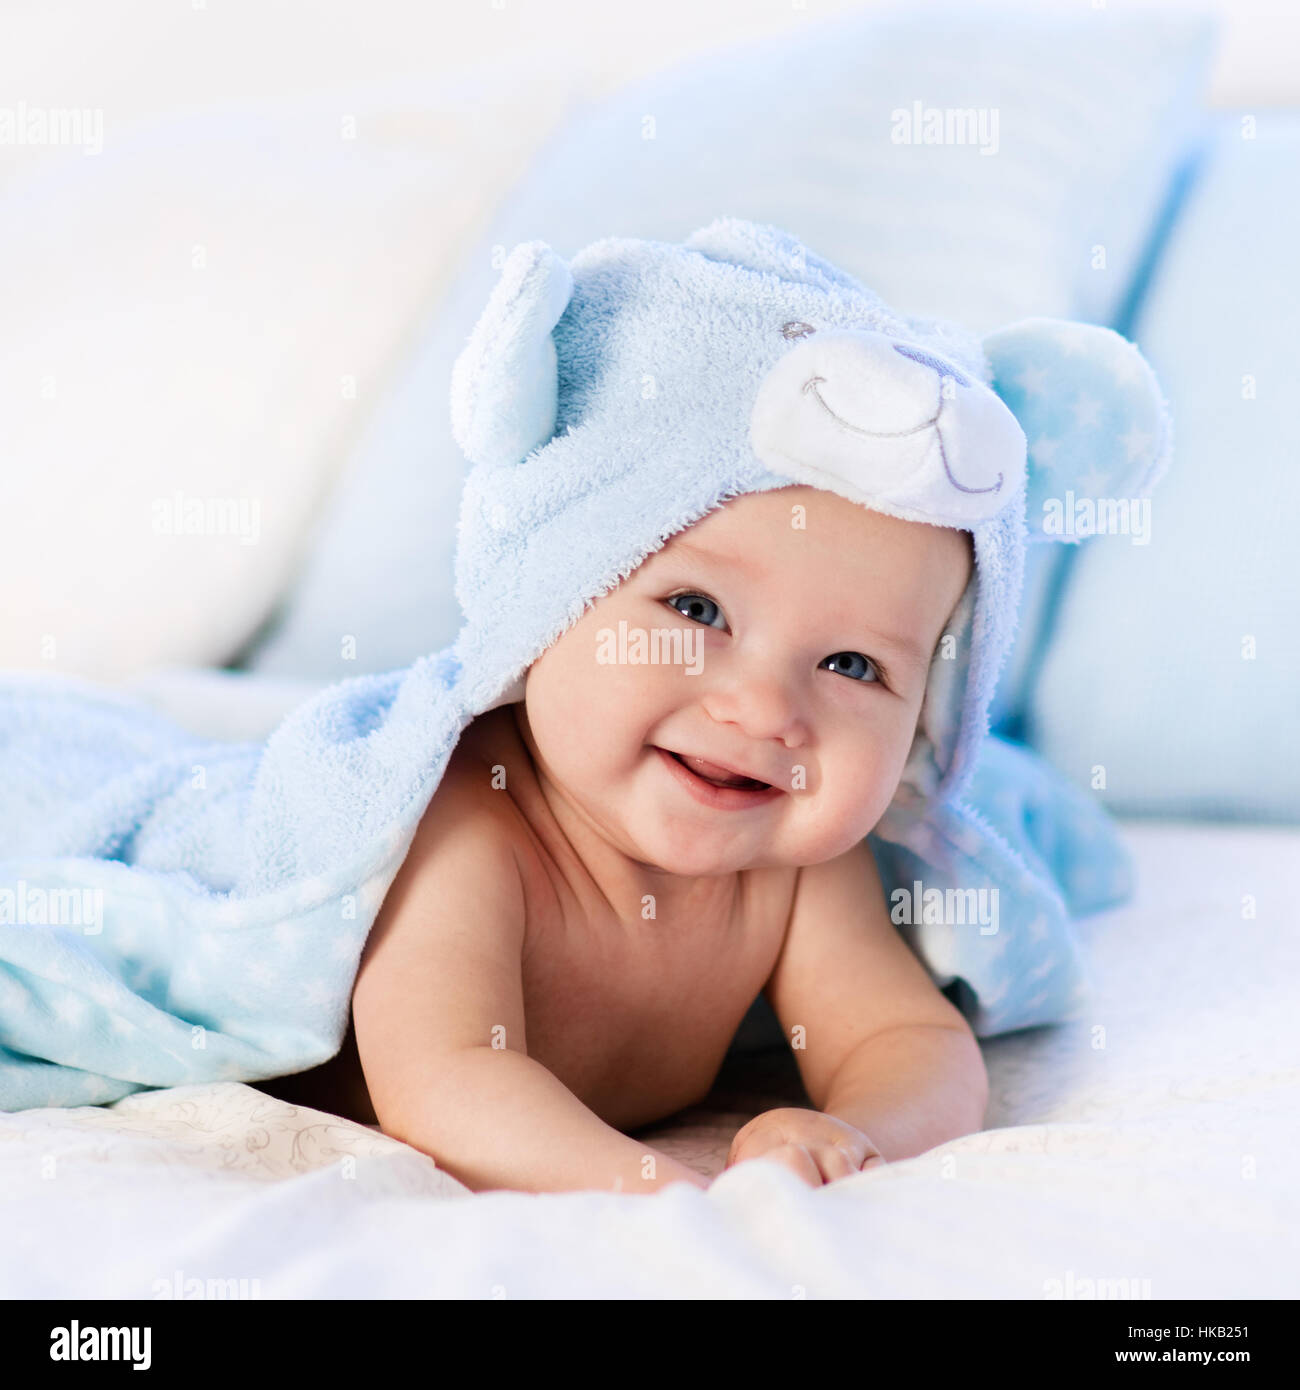 Baby boy wearing diaper and blue towel in white sunny bedroom. Newborn child relaxing in bed after bath or shower. Stock Photo